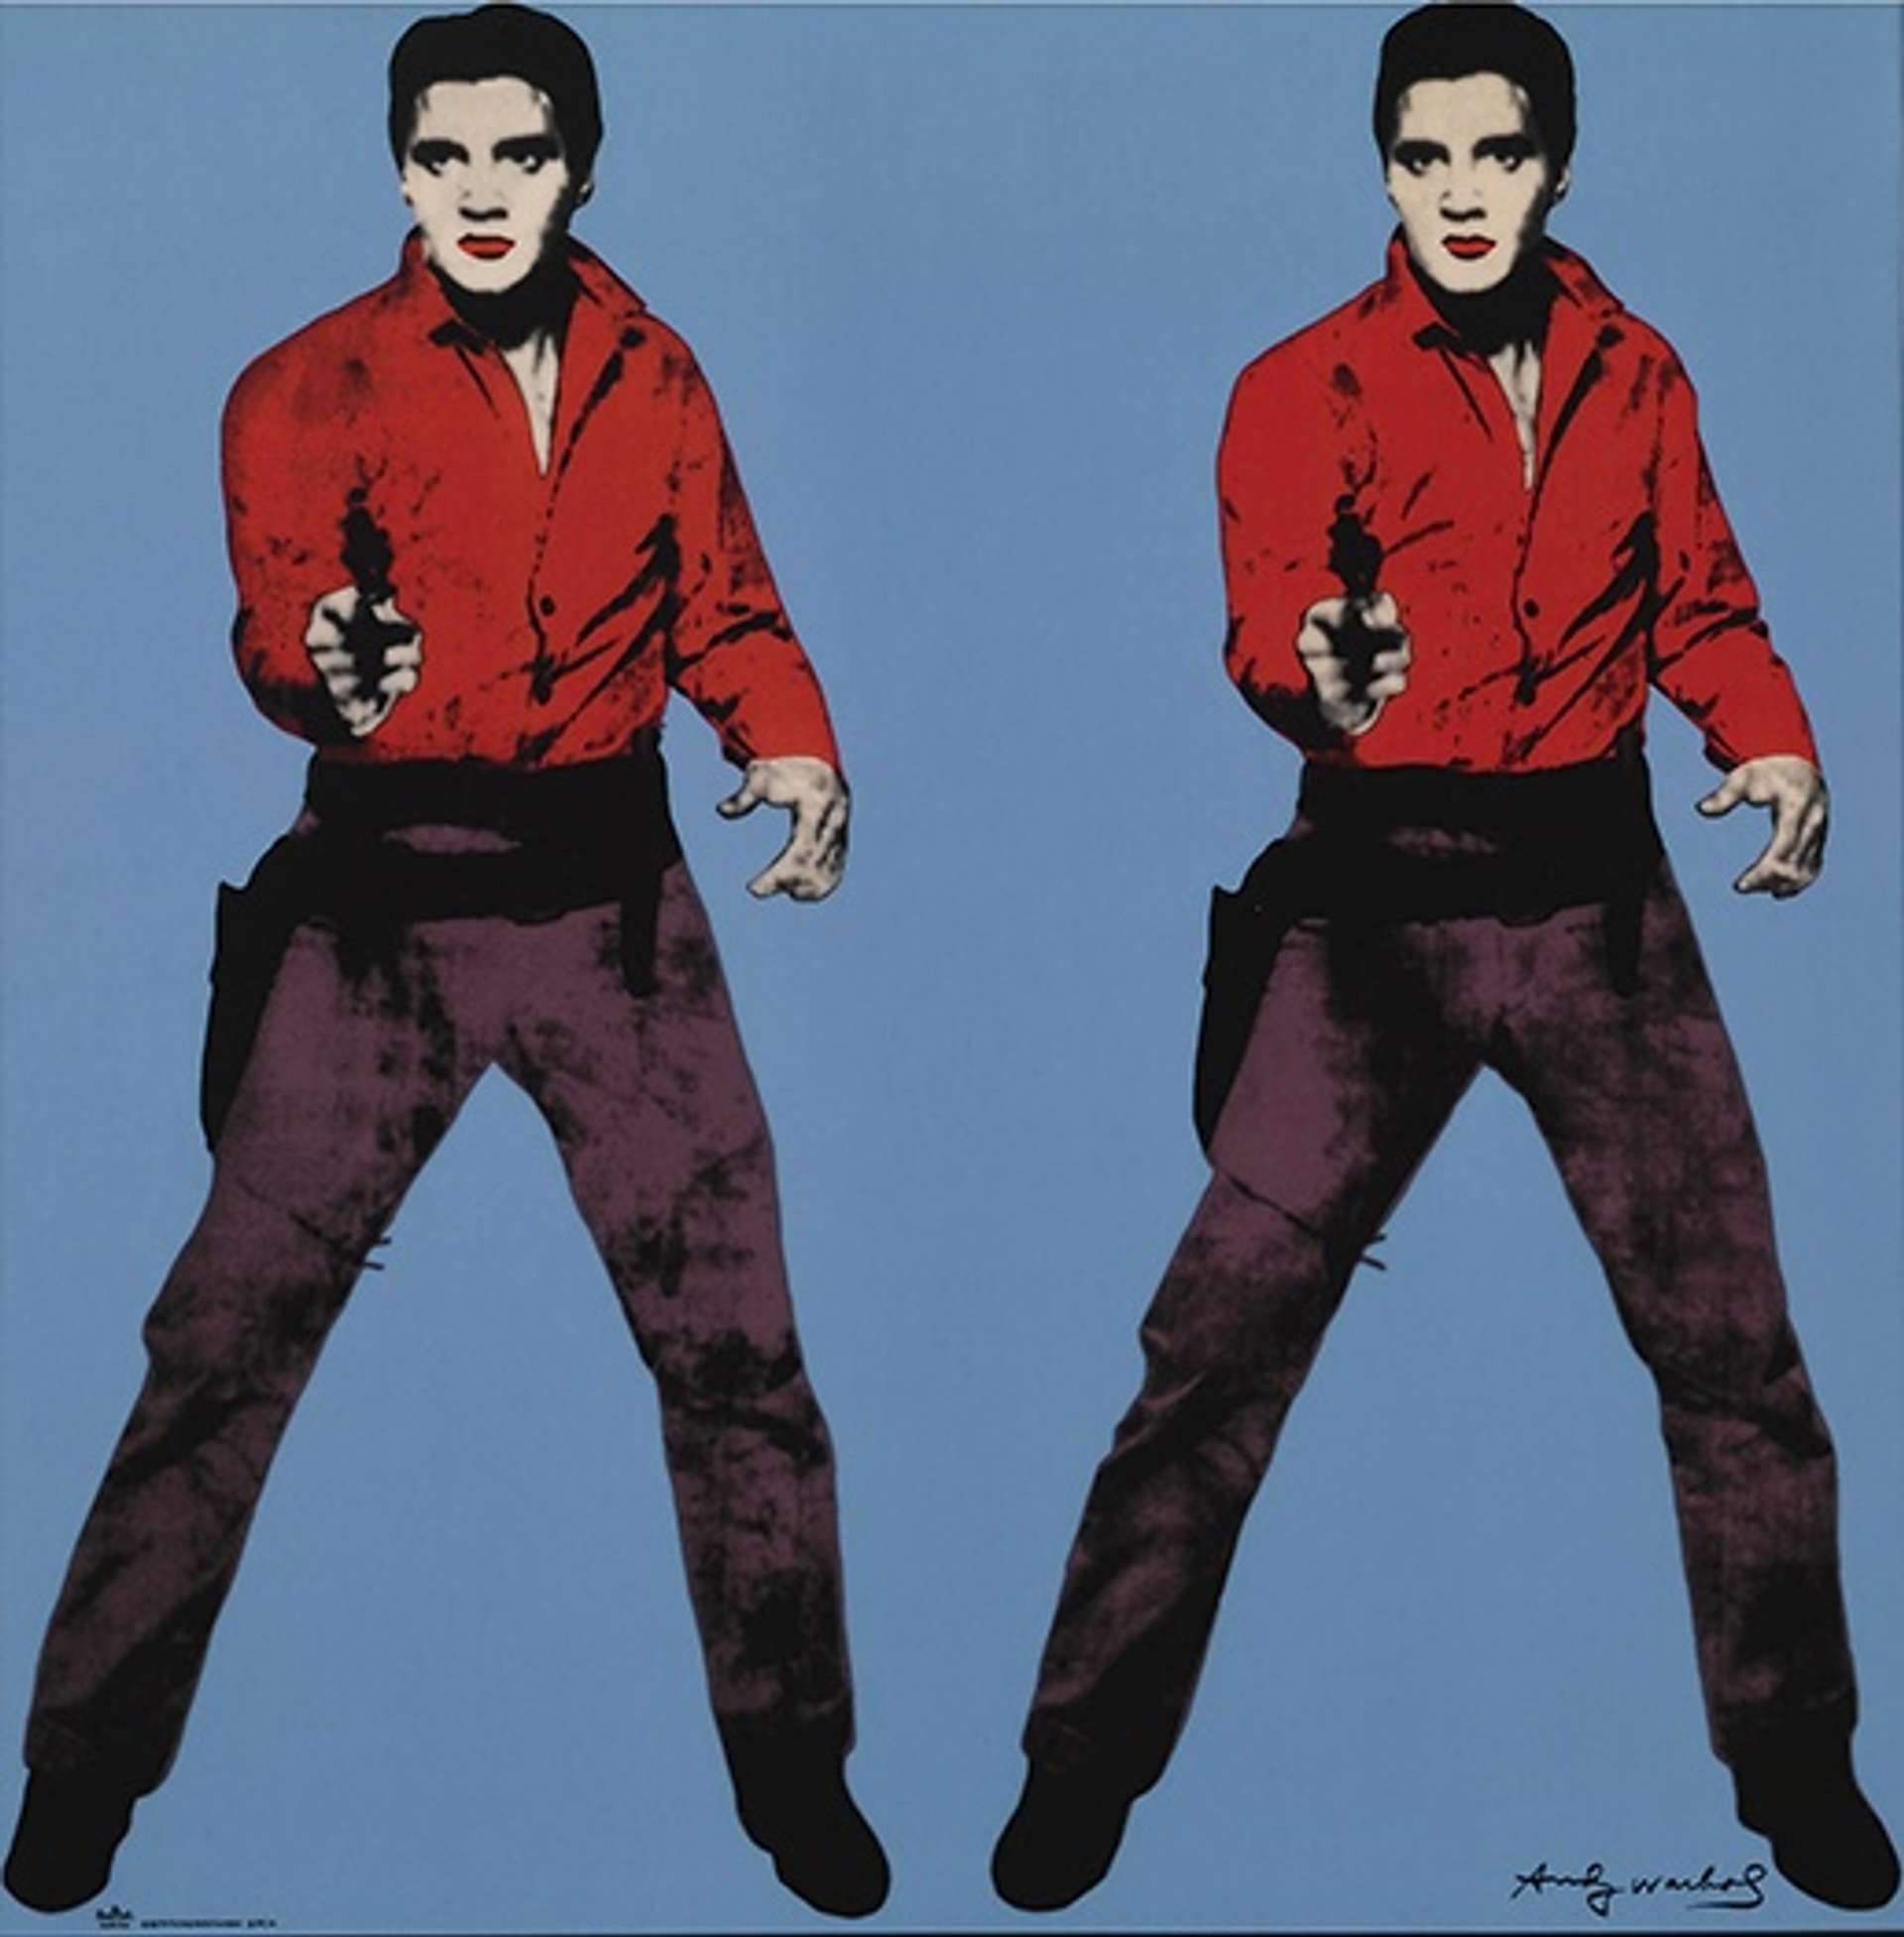 A screenprint by Andy Warhol depicting Elvis Presley twice, in a red shirt and burgundy trousers, pointing a gun out towards the viewer.